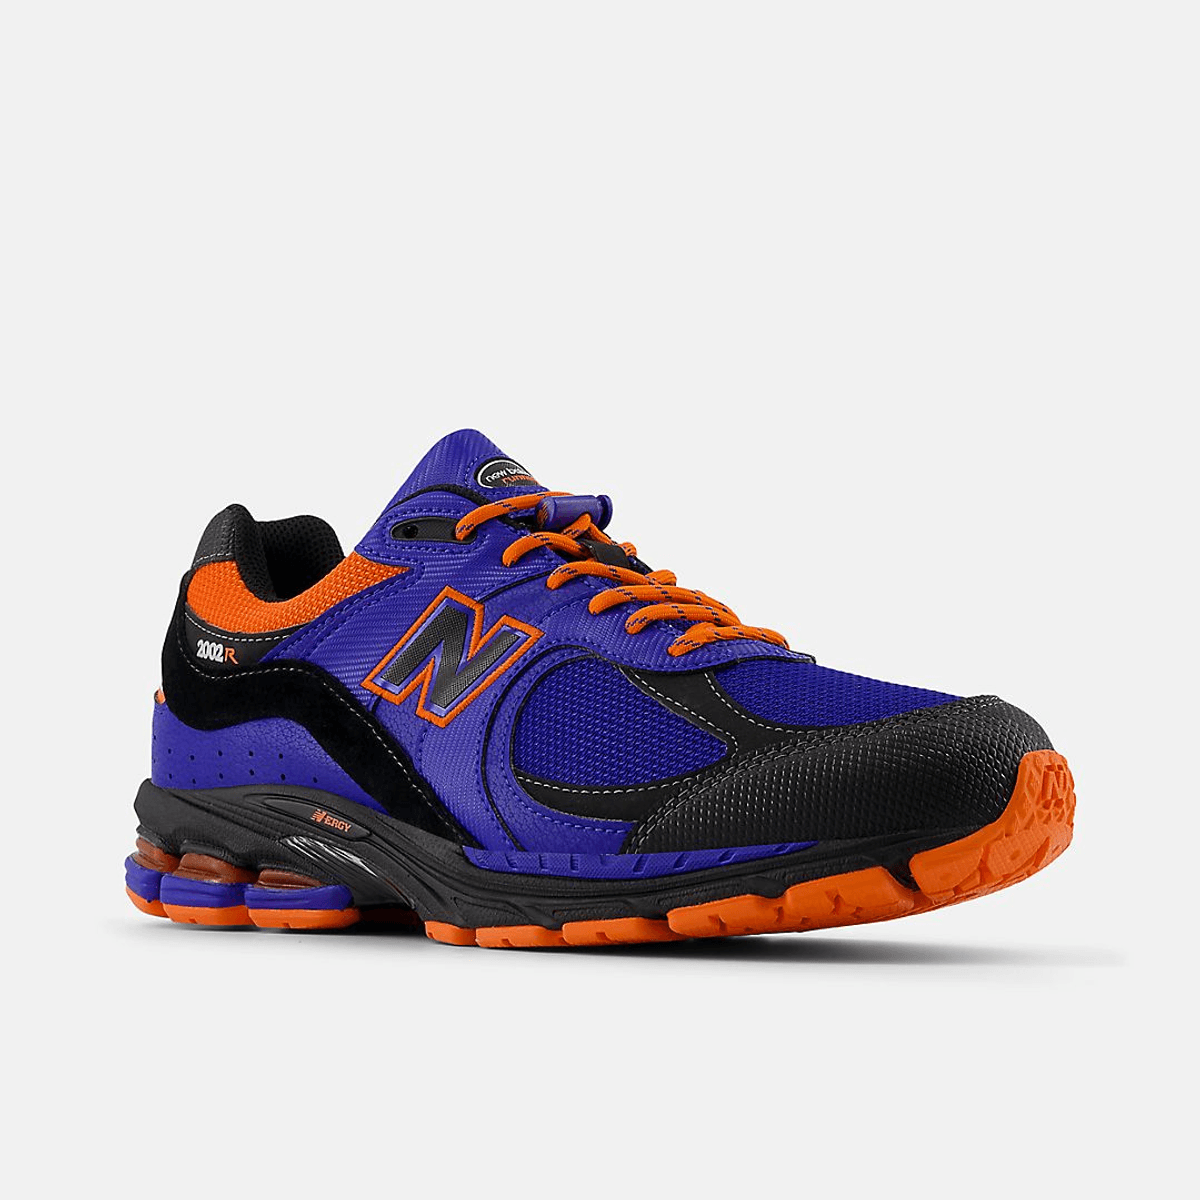 New Balance 2002R GORE-TEX "Phoenix Suns" Will Be Ready For Winter 2024